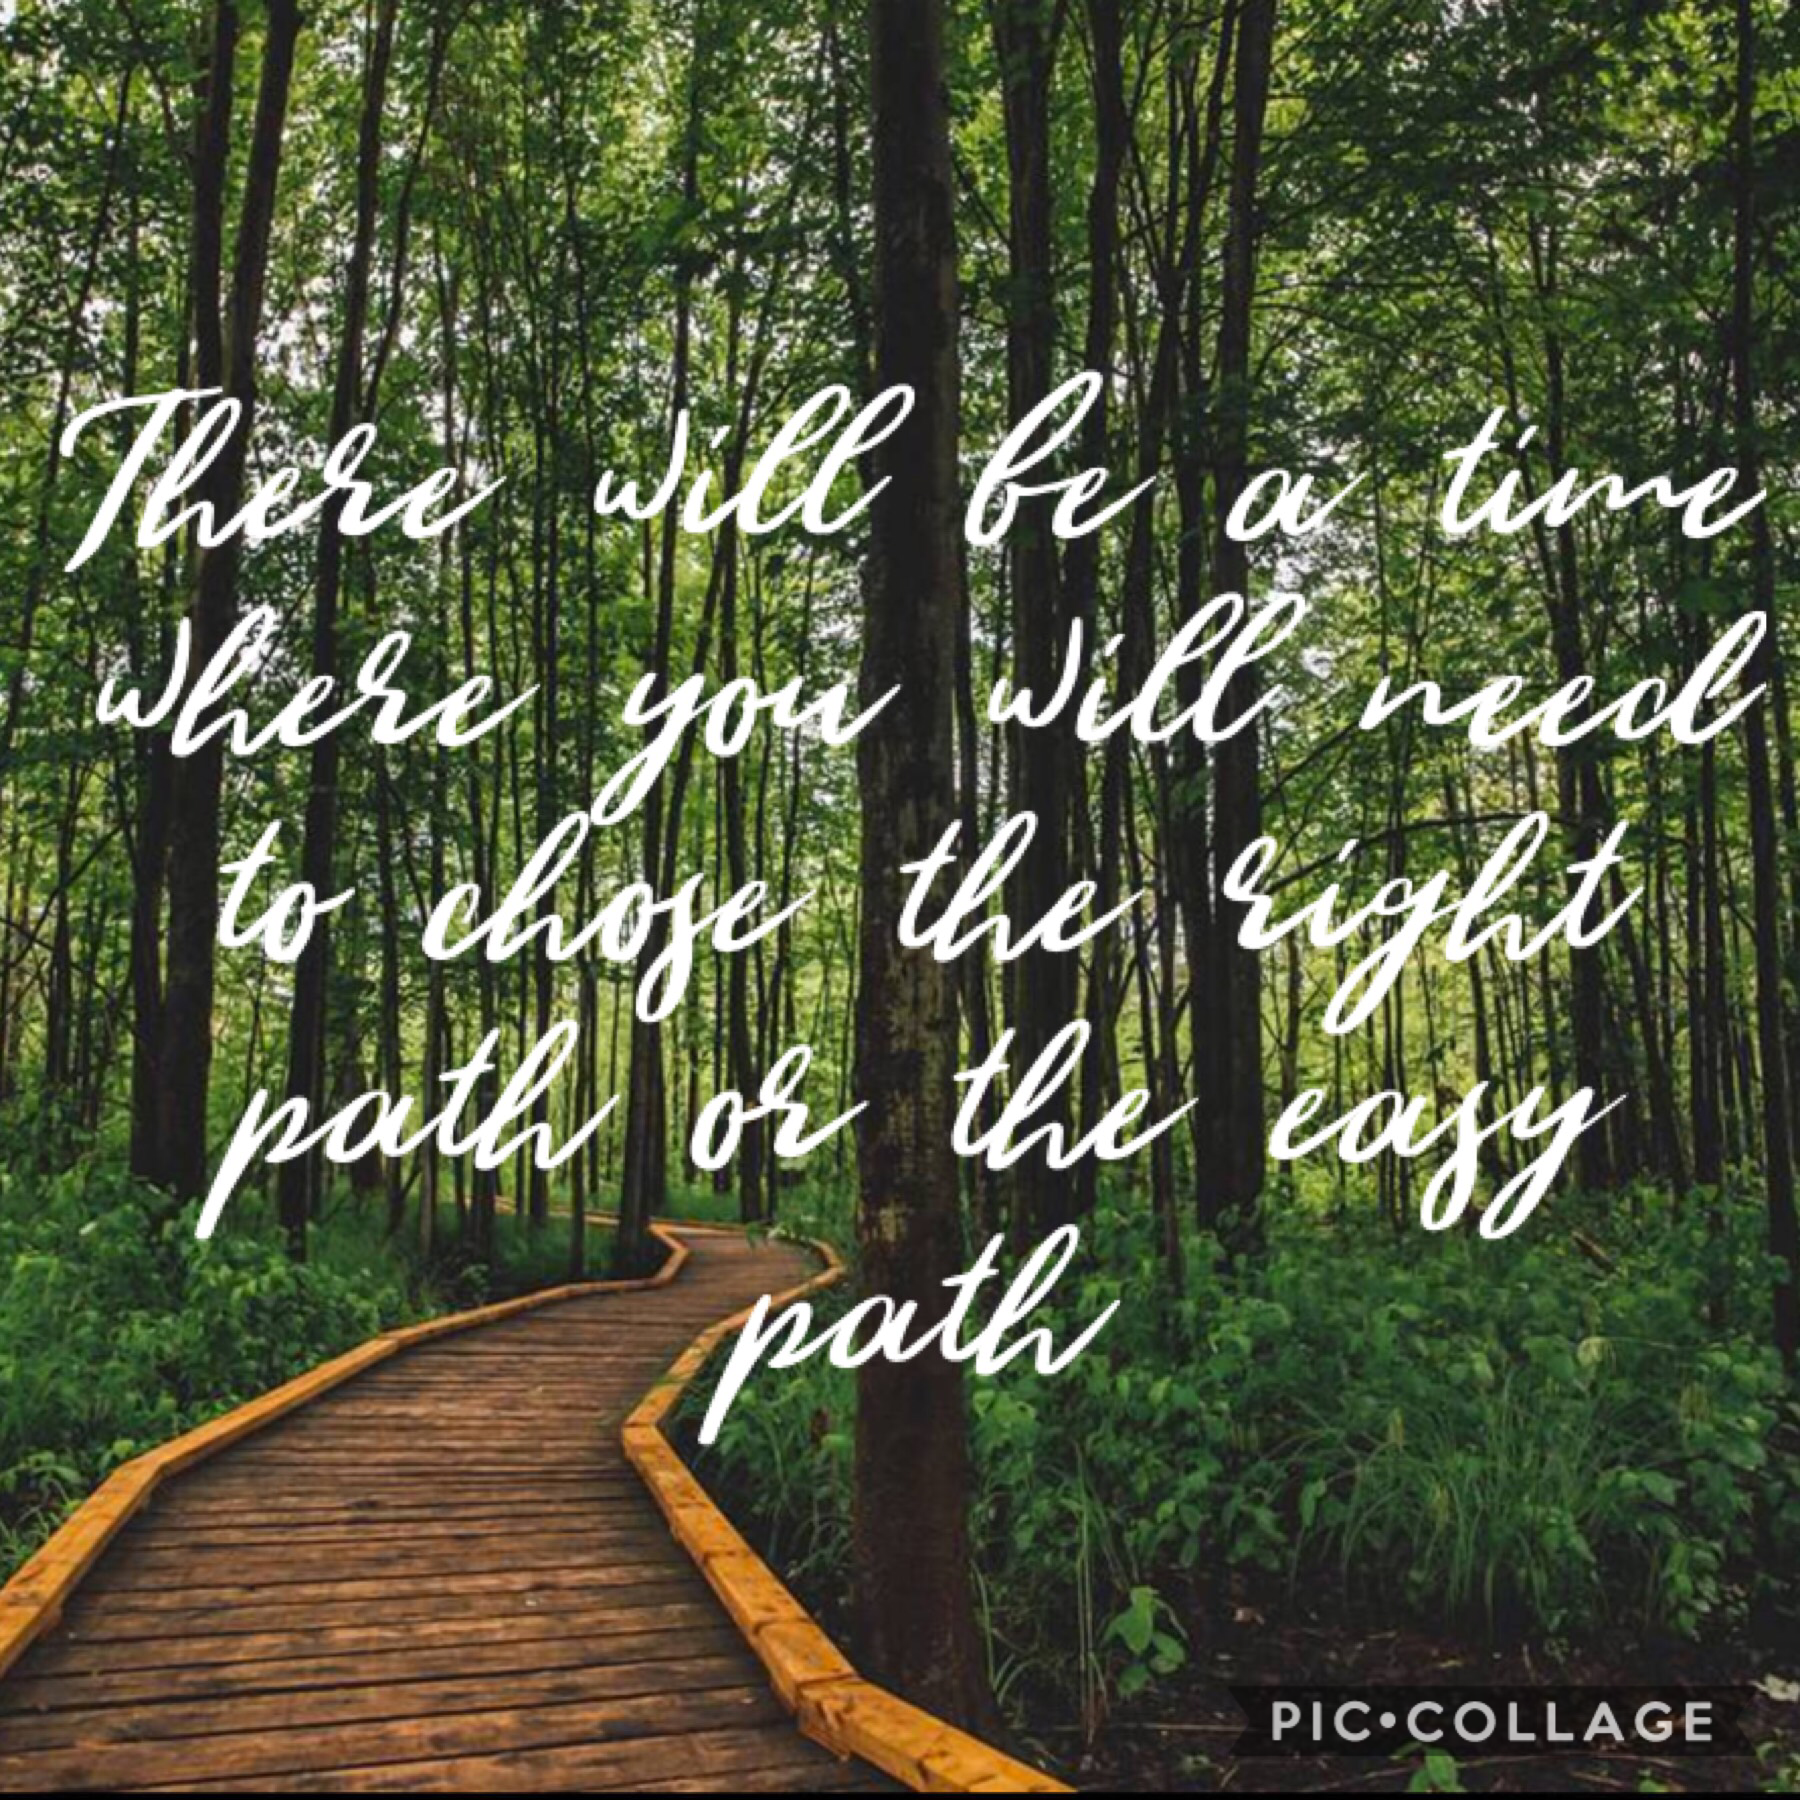 There will be a time in your life where you will need to choose the right path or the easy path